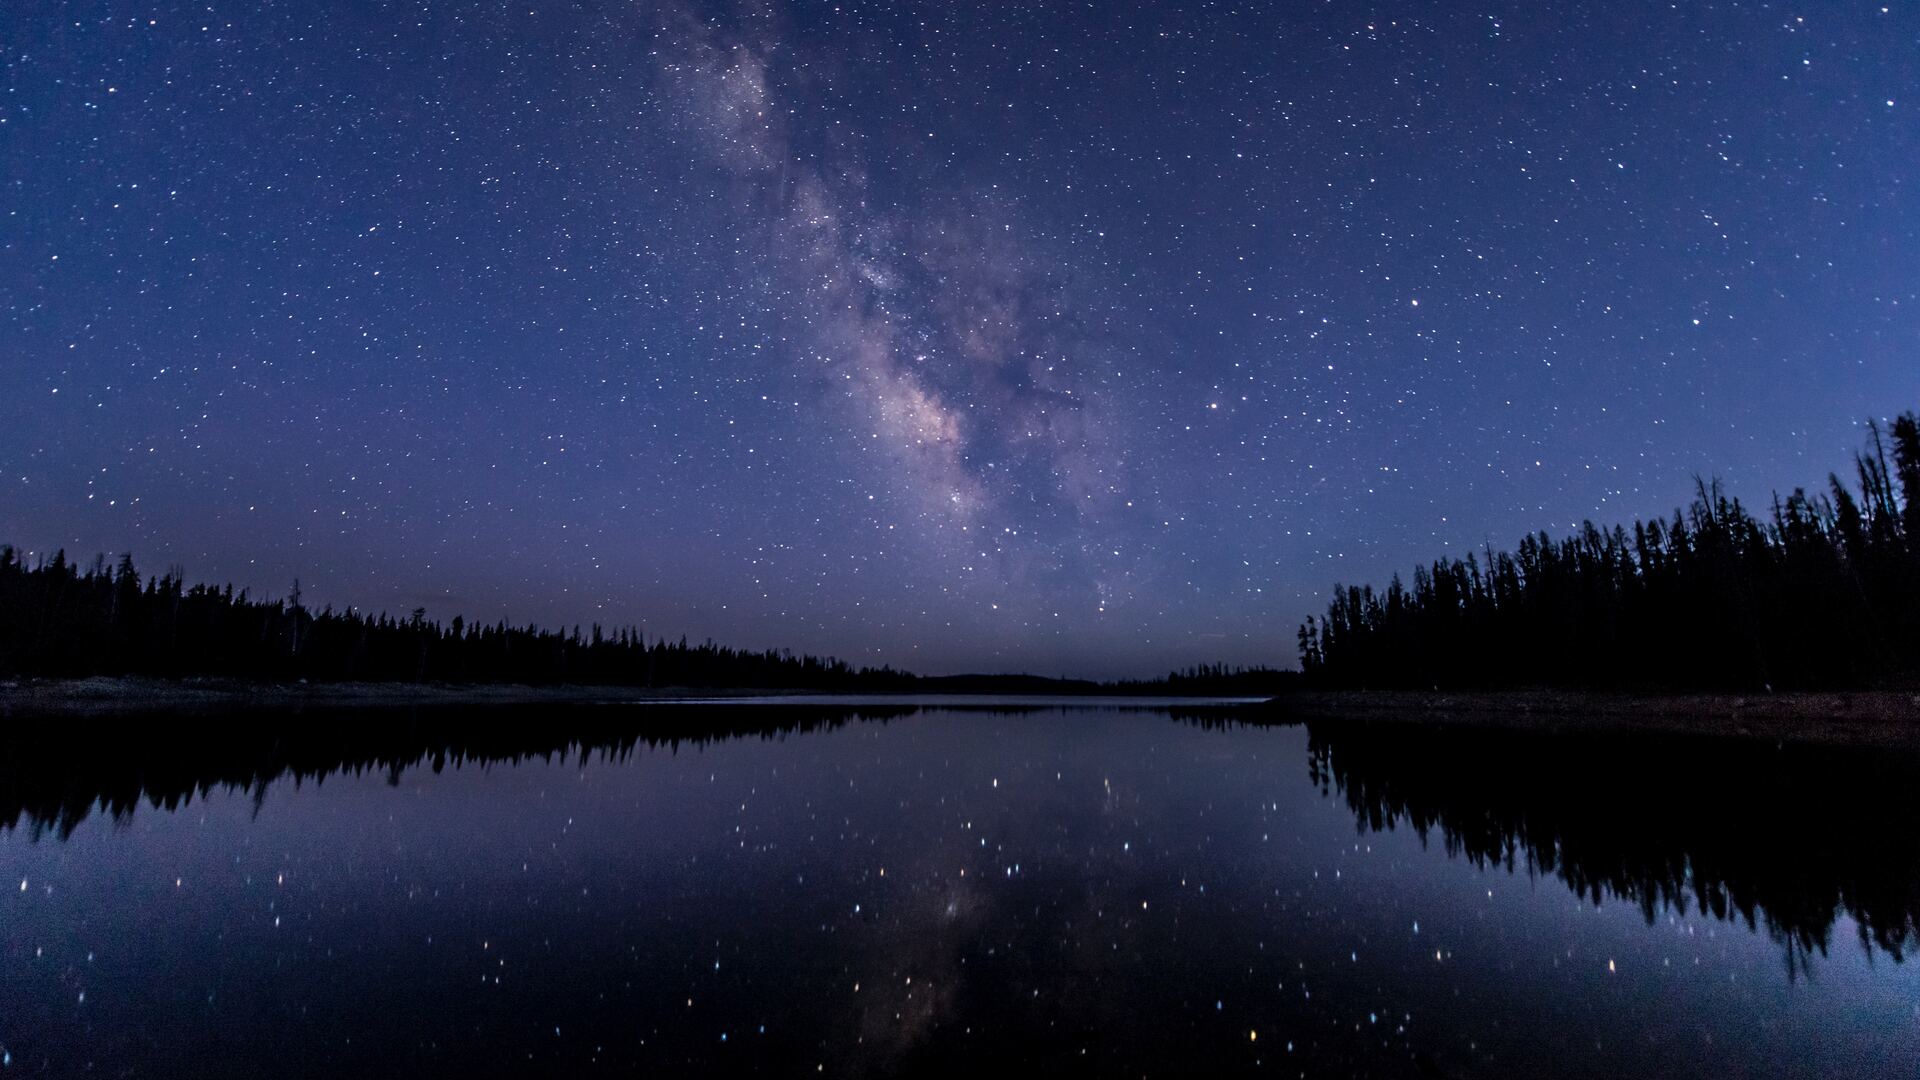 Milkway Lake Water Reflection Stars 5k Laptop Full HD 1080P HD 4k Wallpaper, Image, Background, Photo and Picture